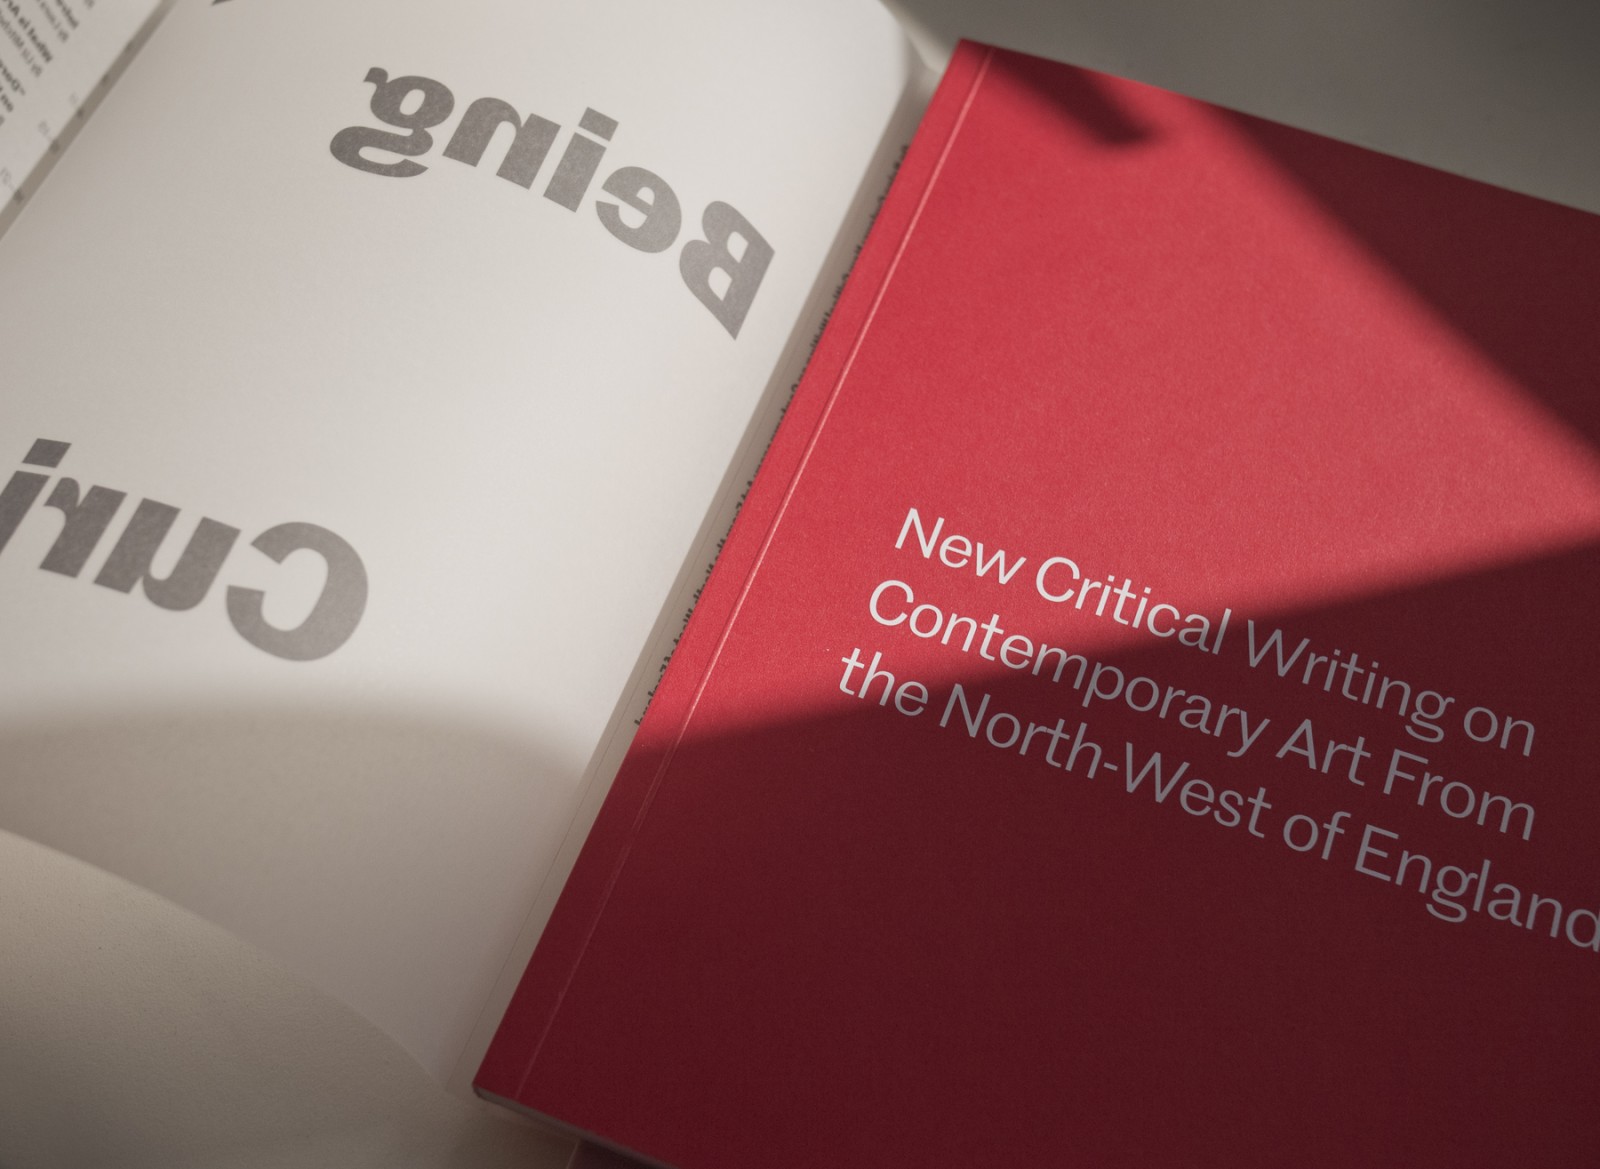 On Being Curious: New Critical Writing on Contemporary Art From the North-West of England